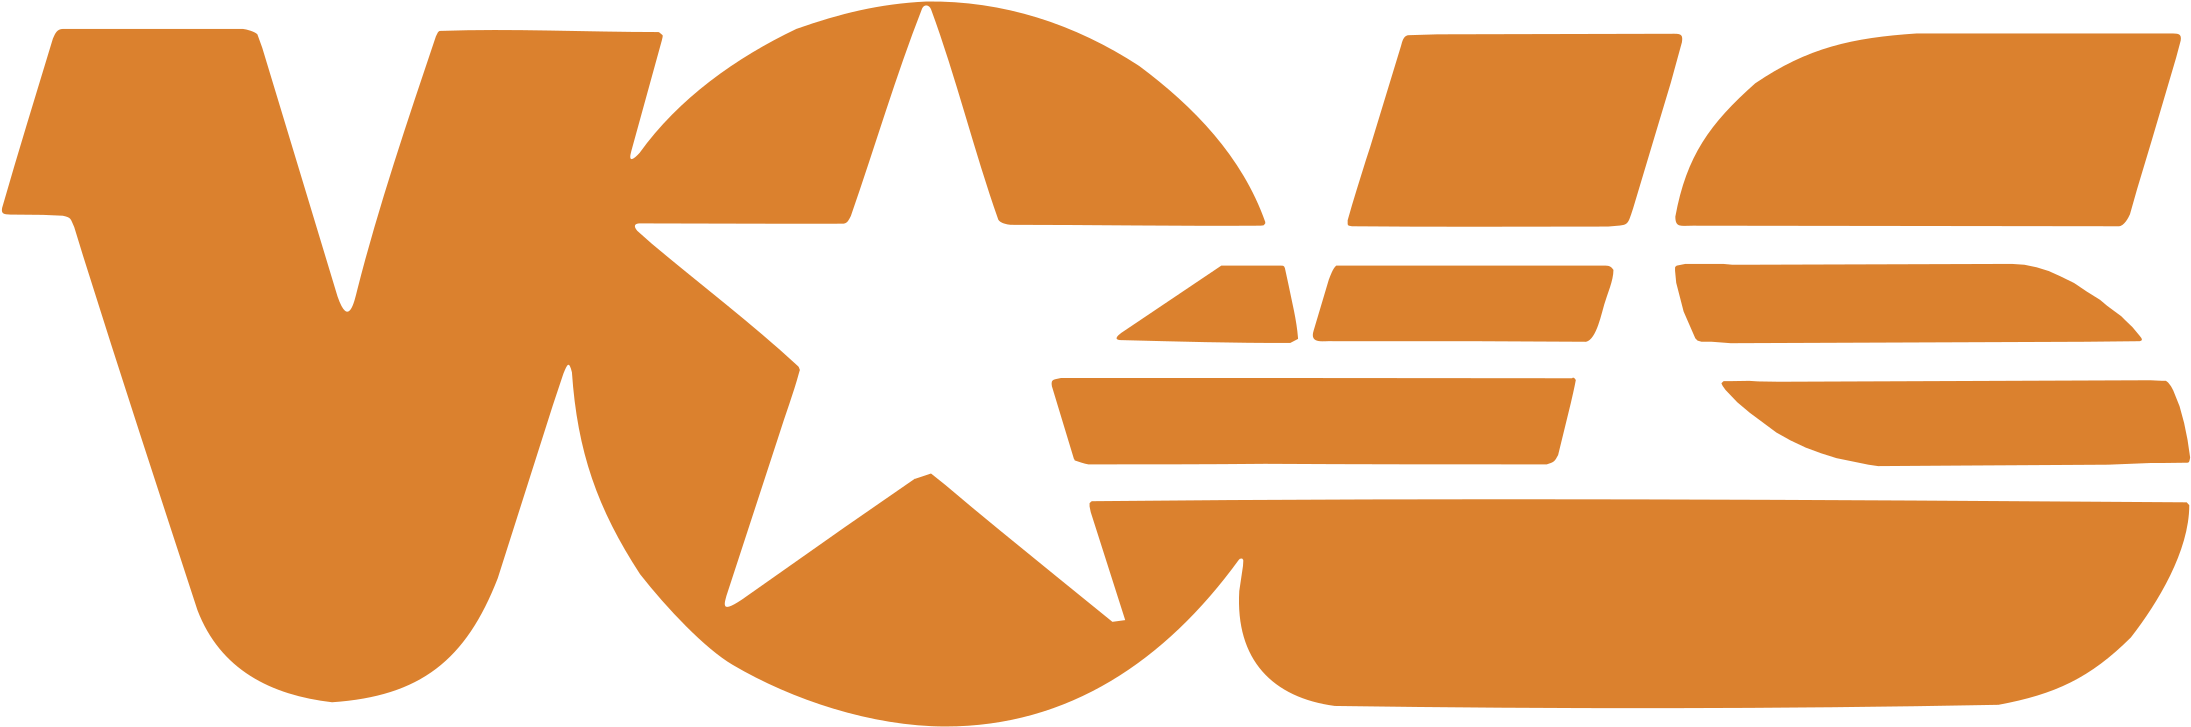 Tennessee Vols Logo Png Transparent Tennessee Vols Davy